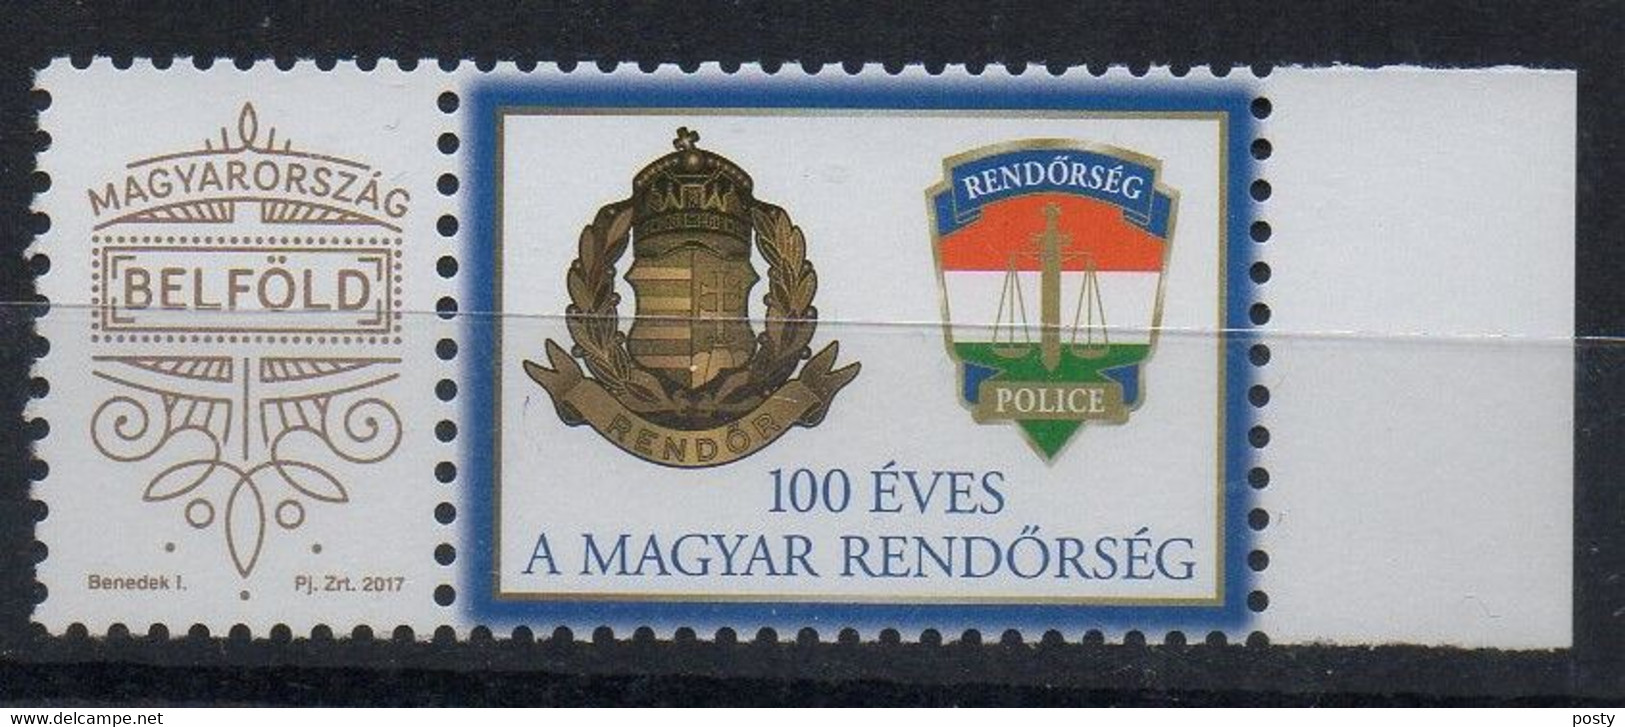 HONGRIE - HUNGARY - 2017 - TIMBRE PERSONALISE - BELFÖLD - BLASON - COAT OF ARMS - POLICE - - Prove E Ristampe